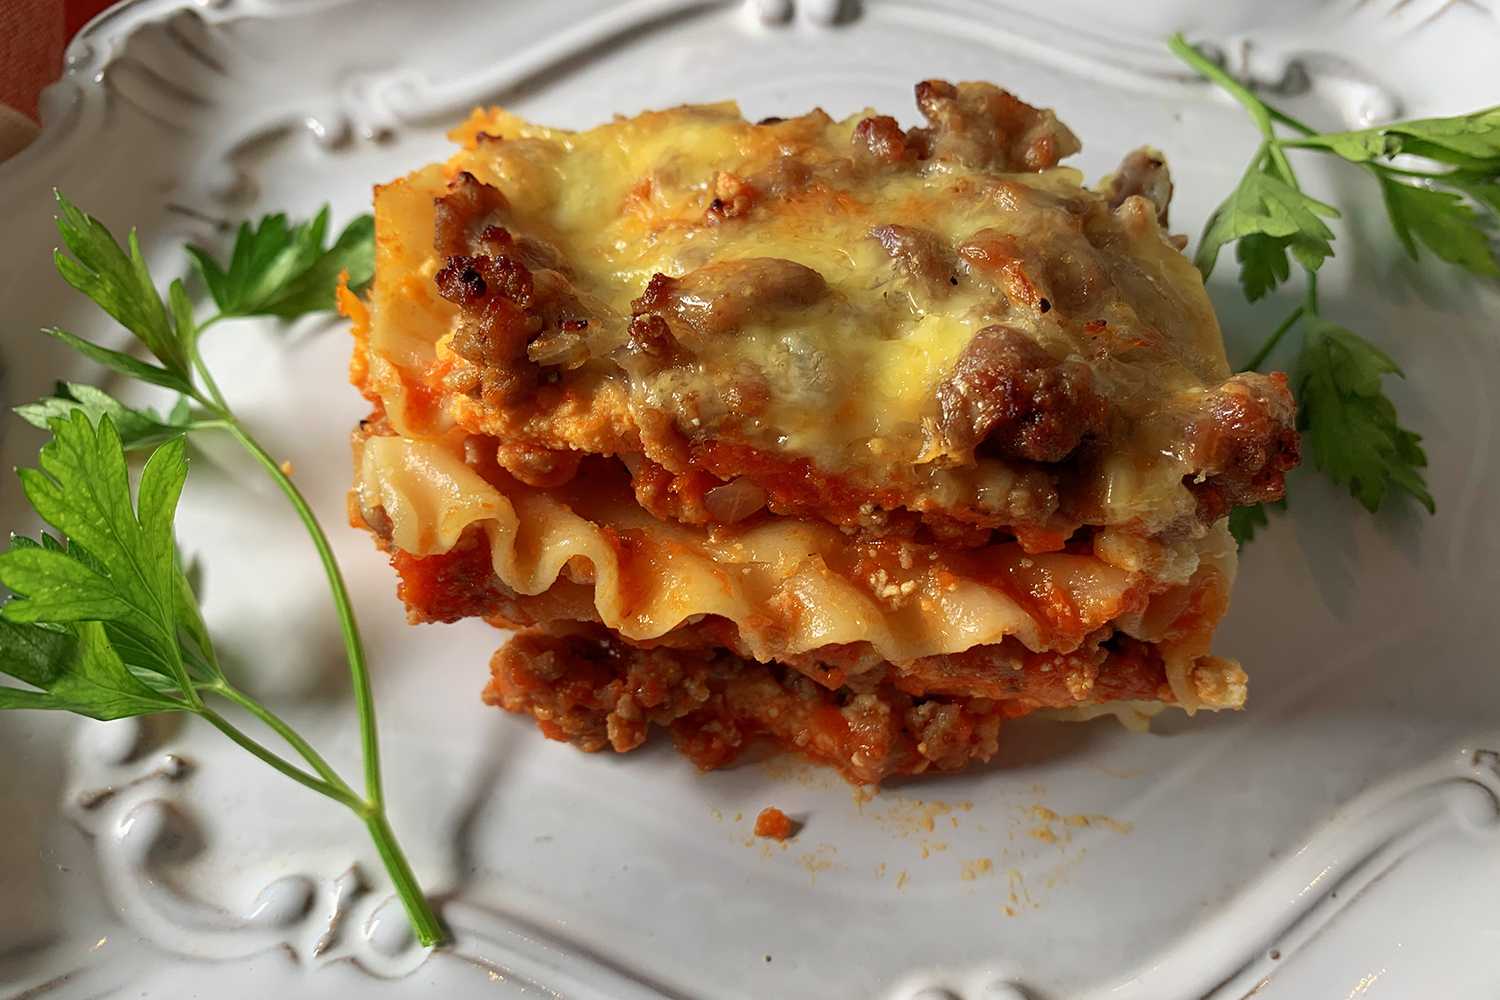 Lasagna slice with ground beef and tomato sauce, topped with melted cheese with parsley on side